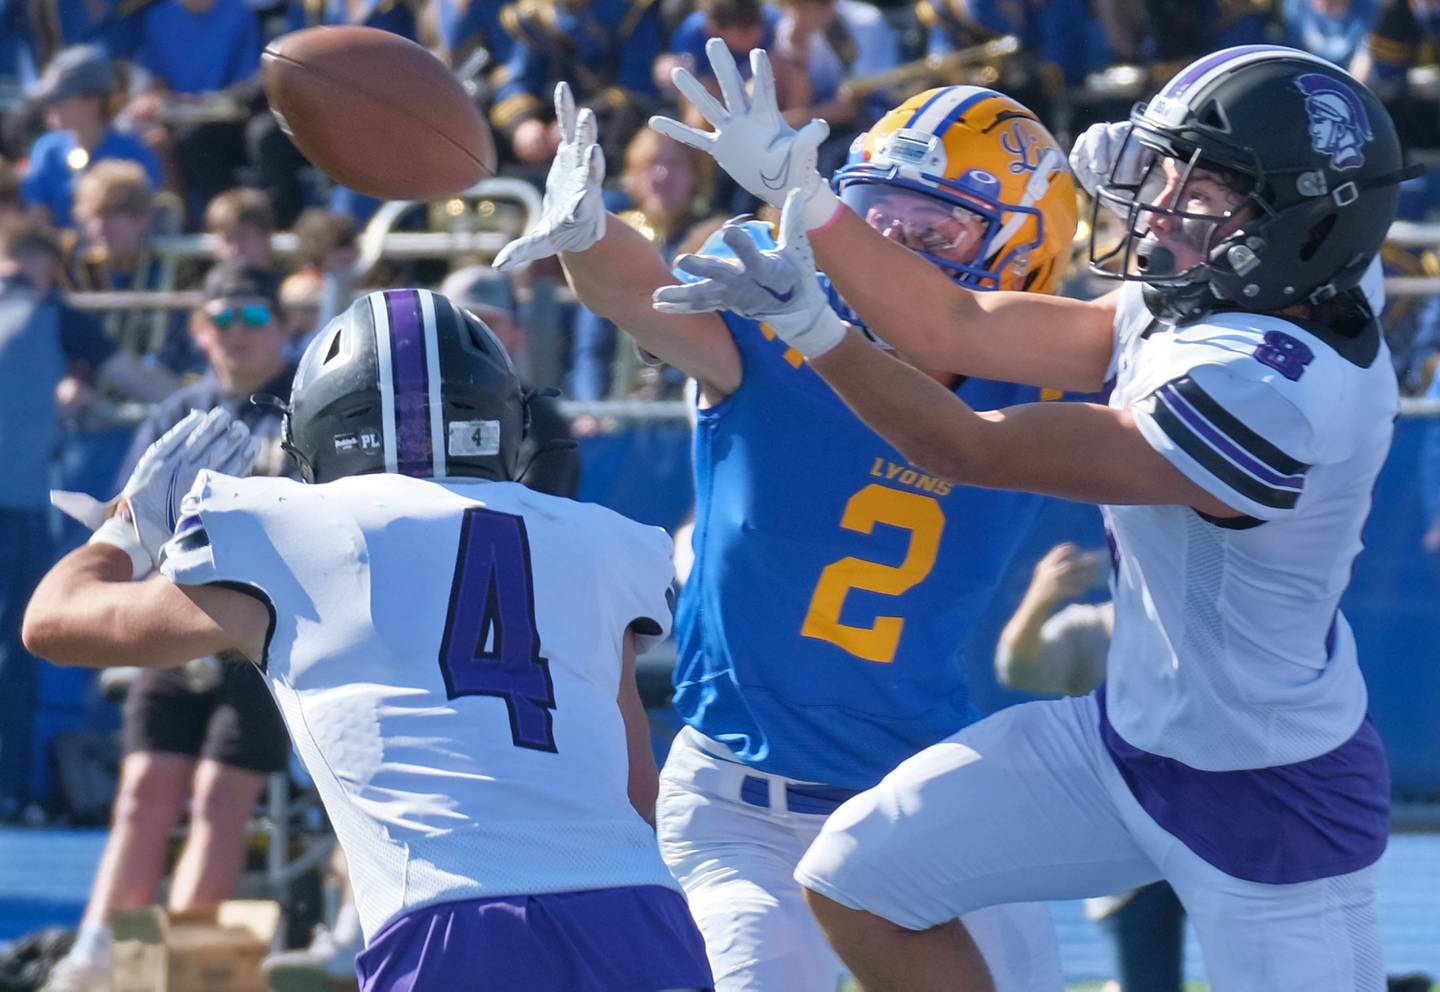 Lyons Township's Travis Stamm (2) and Downers Grove North's Jarett Henriquez and Joseph Chiarelli go for the ball during a game on Oct. 22, 2022 at Lyons Township High School in LaGrange.